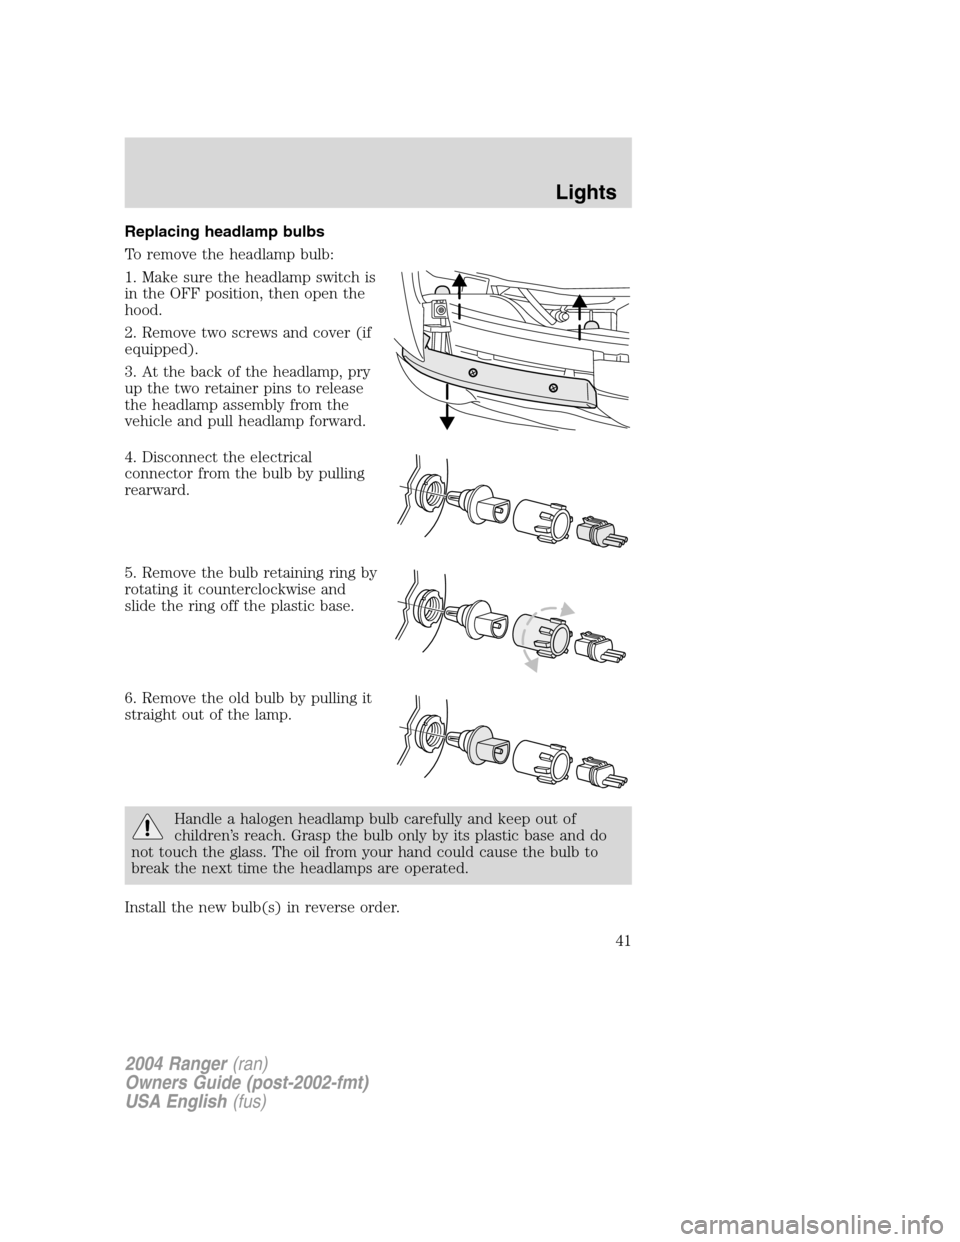 FORD RANGER 2004 2.G Service Manual Replacing headlamp bulbs
To remove the headlamp bulb:
1. Make sure the headlamp switch is
in the OFF position, then open the
hood.
2. Remove two screws and cover (if
equipped).
3. At the back of the h